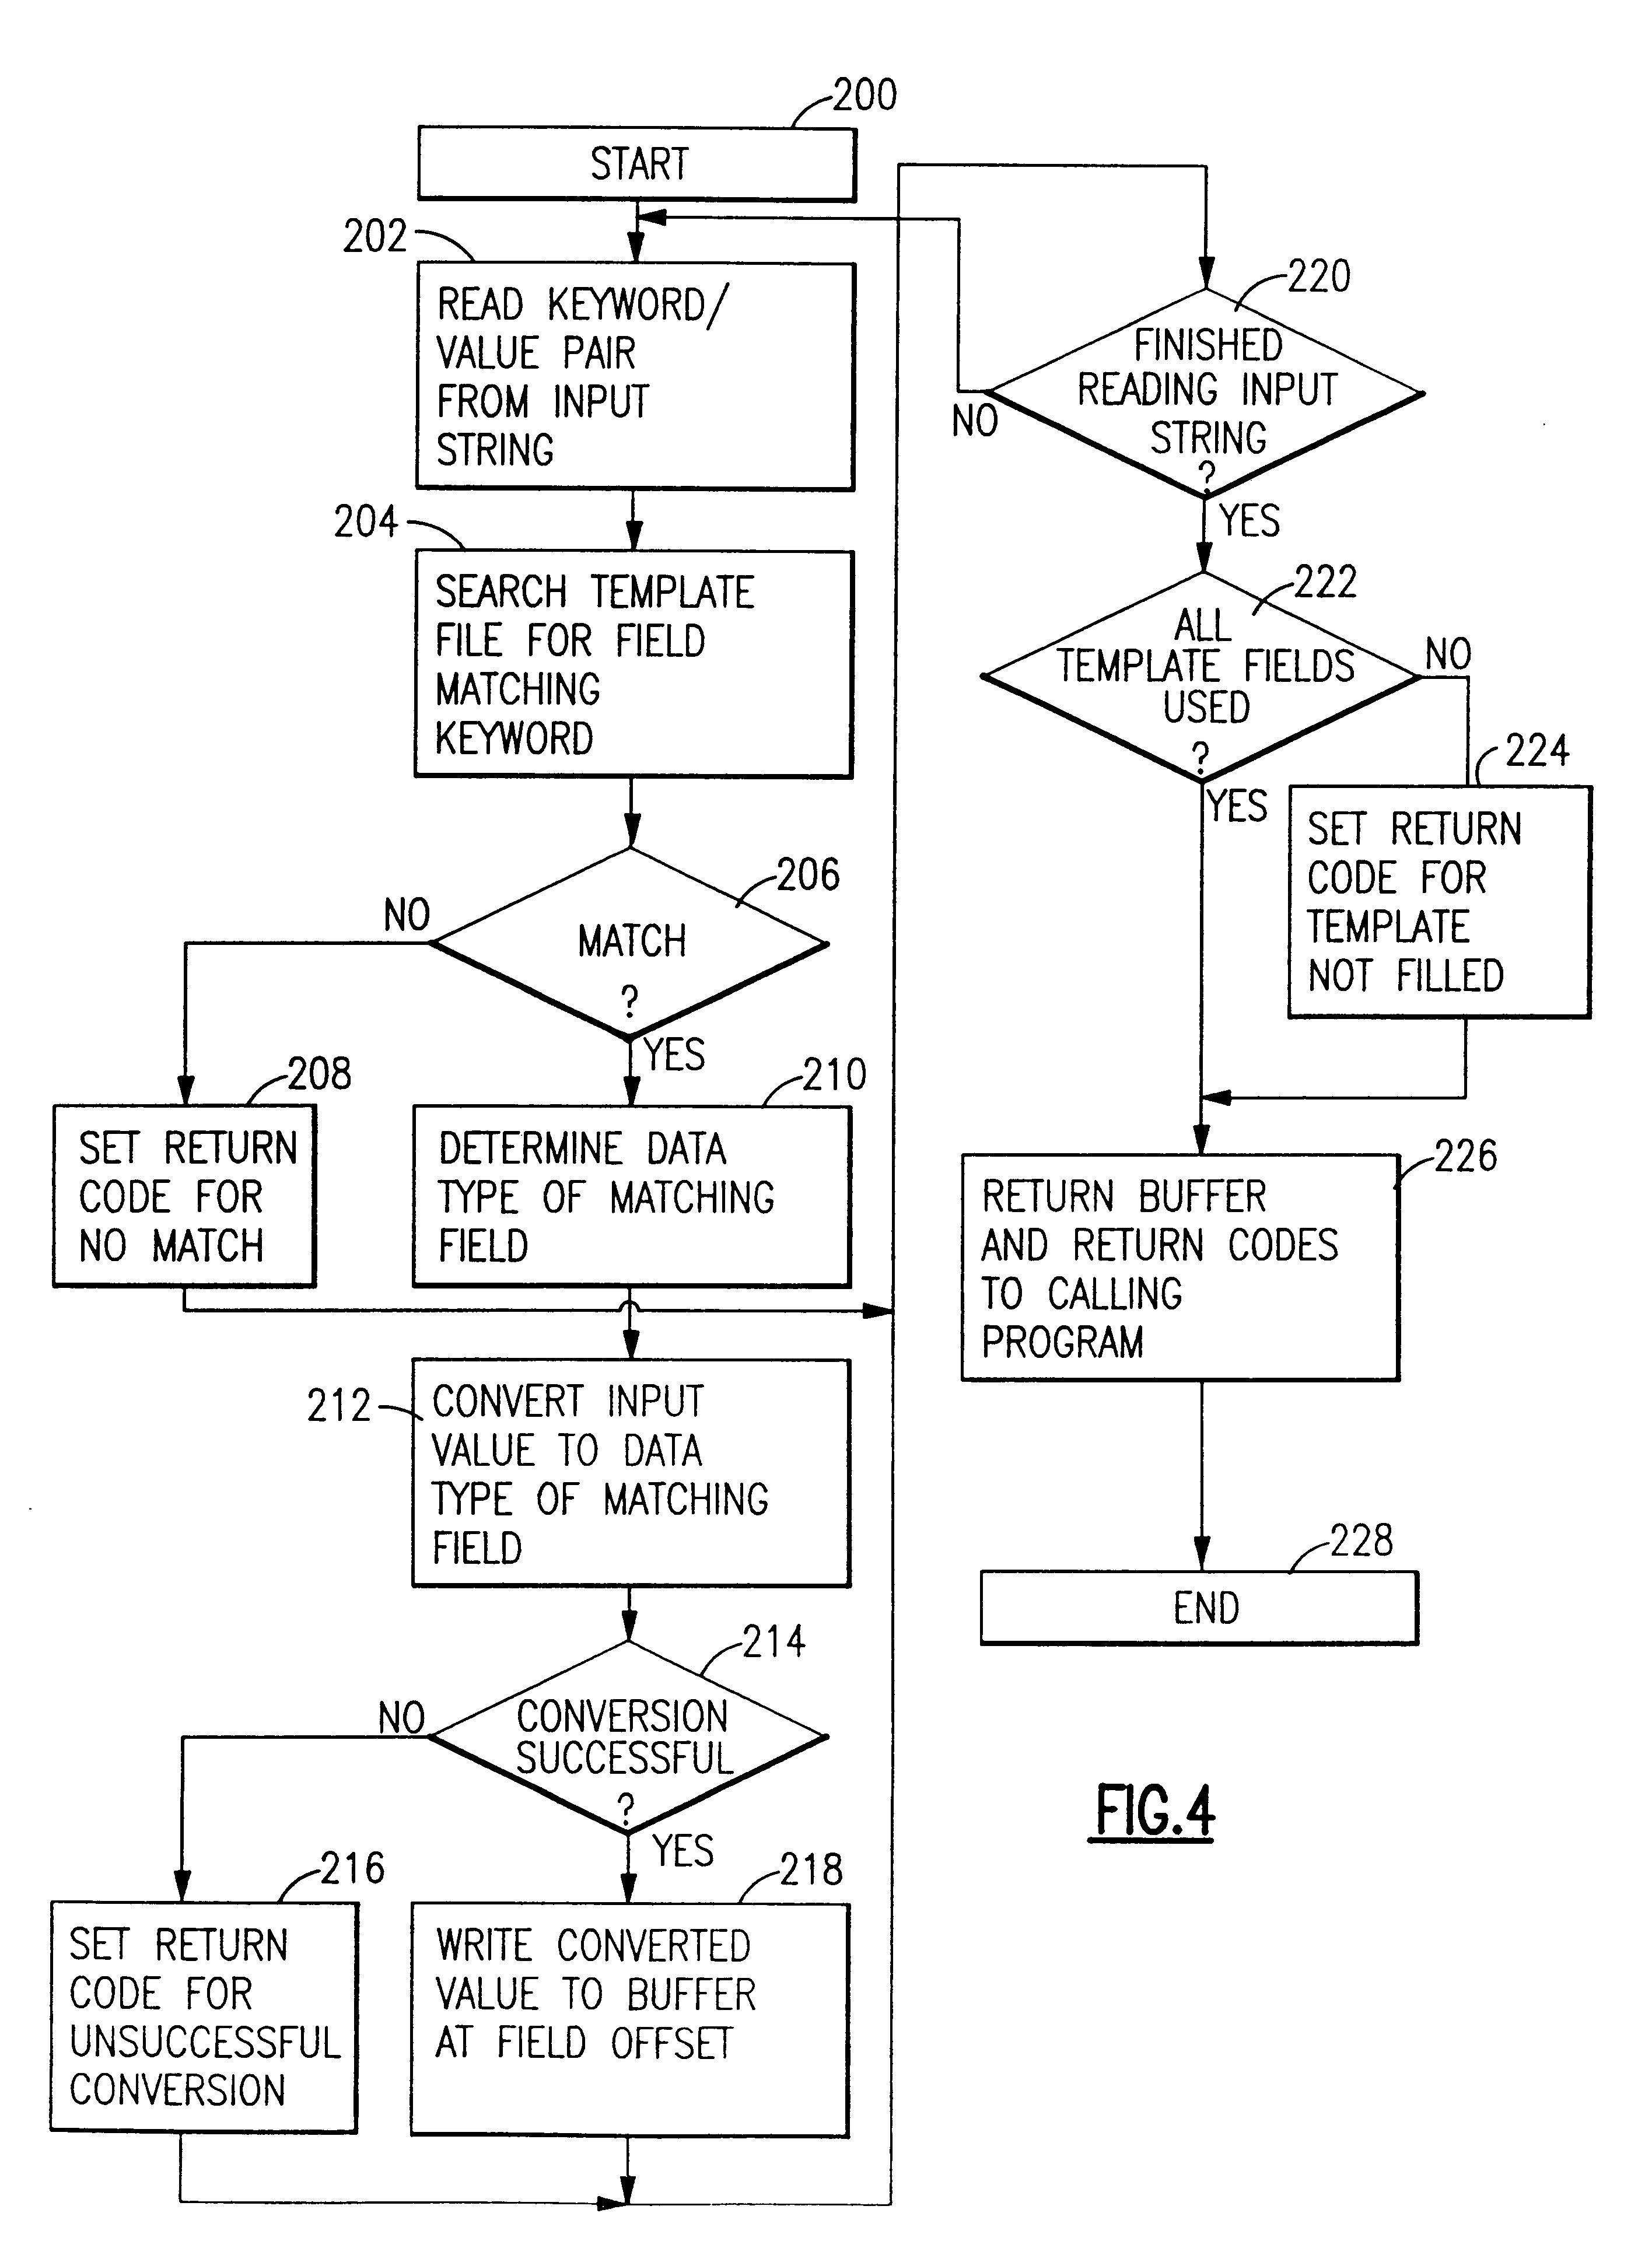 System and method for building a data structure of converted values without keywords from an input string including keyword/text value pairs